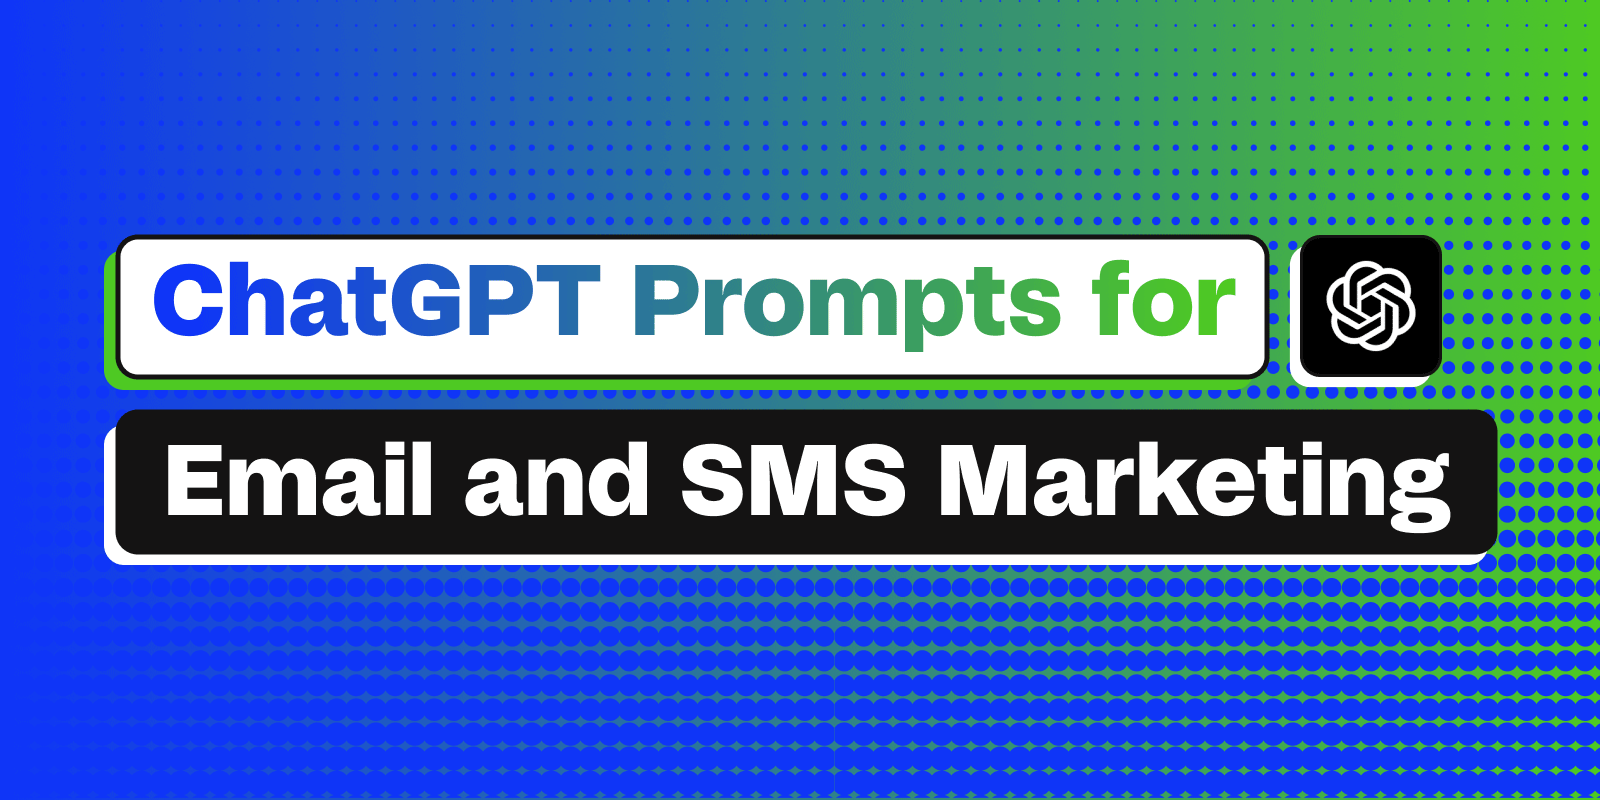 ChatGPT Prompts for Email and SMS Marketing